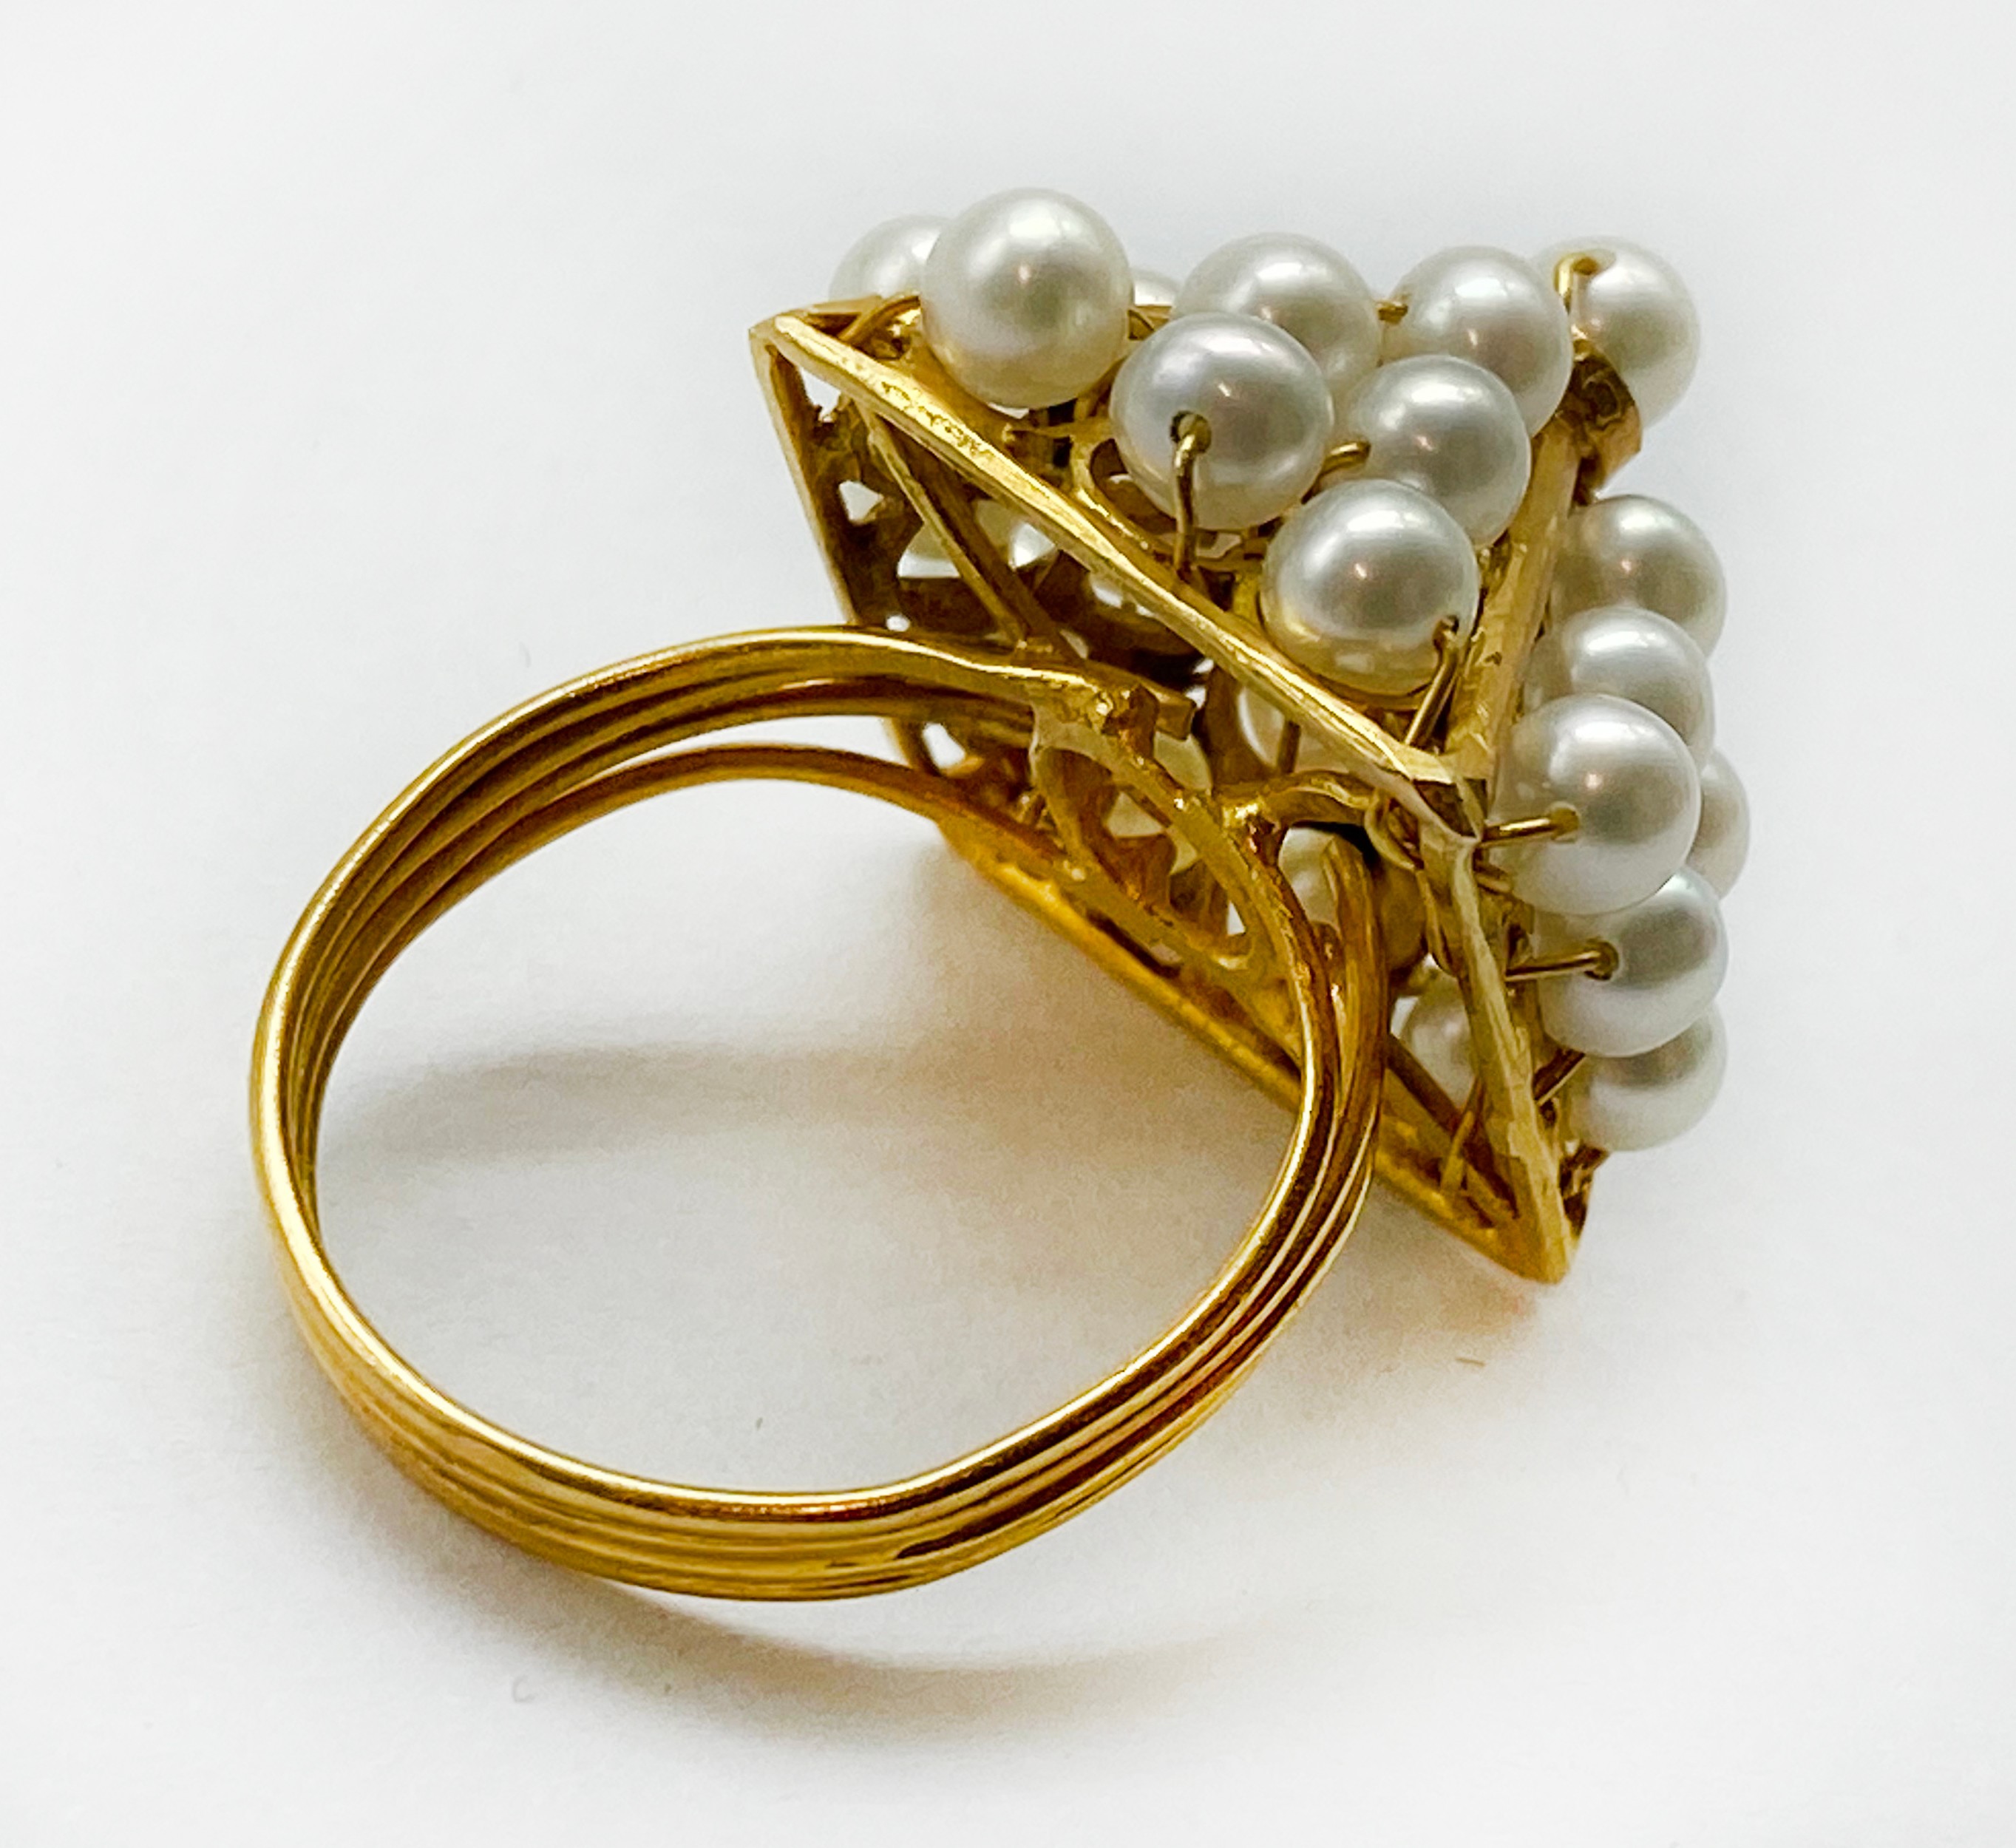 GOLD AND PEARL PYRAMID RING - Image 2 of 2